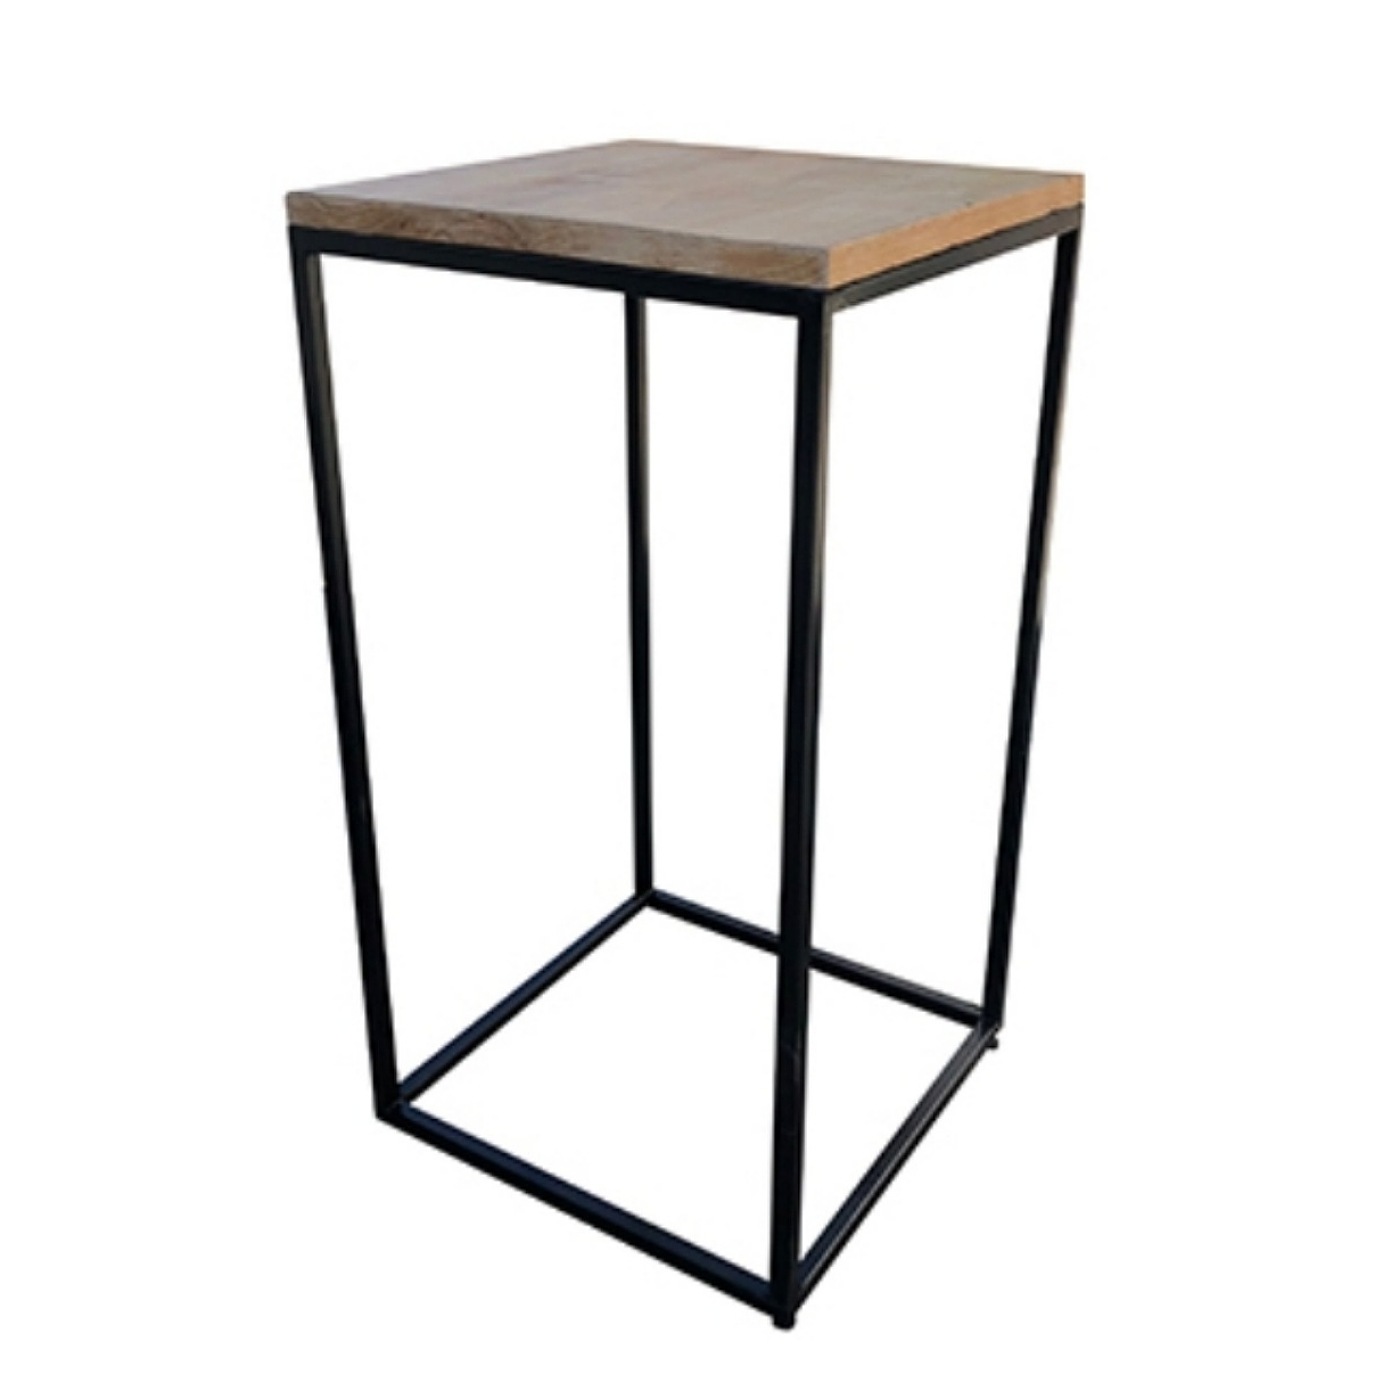 Black Square Frame Cocktail Table With Wooden Top To Hire.